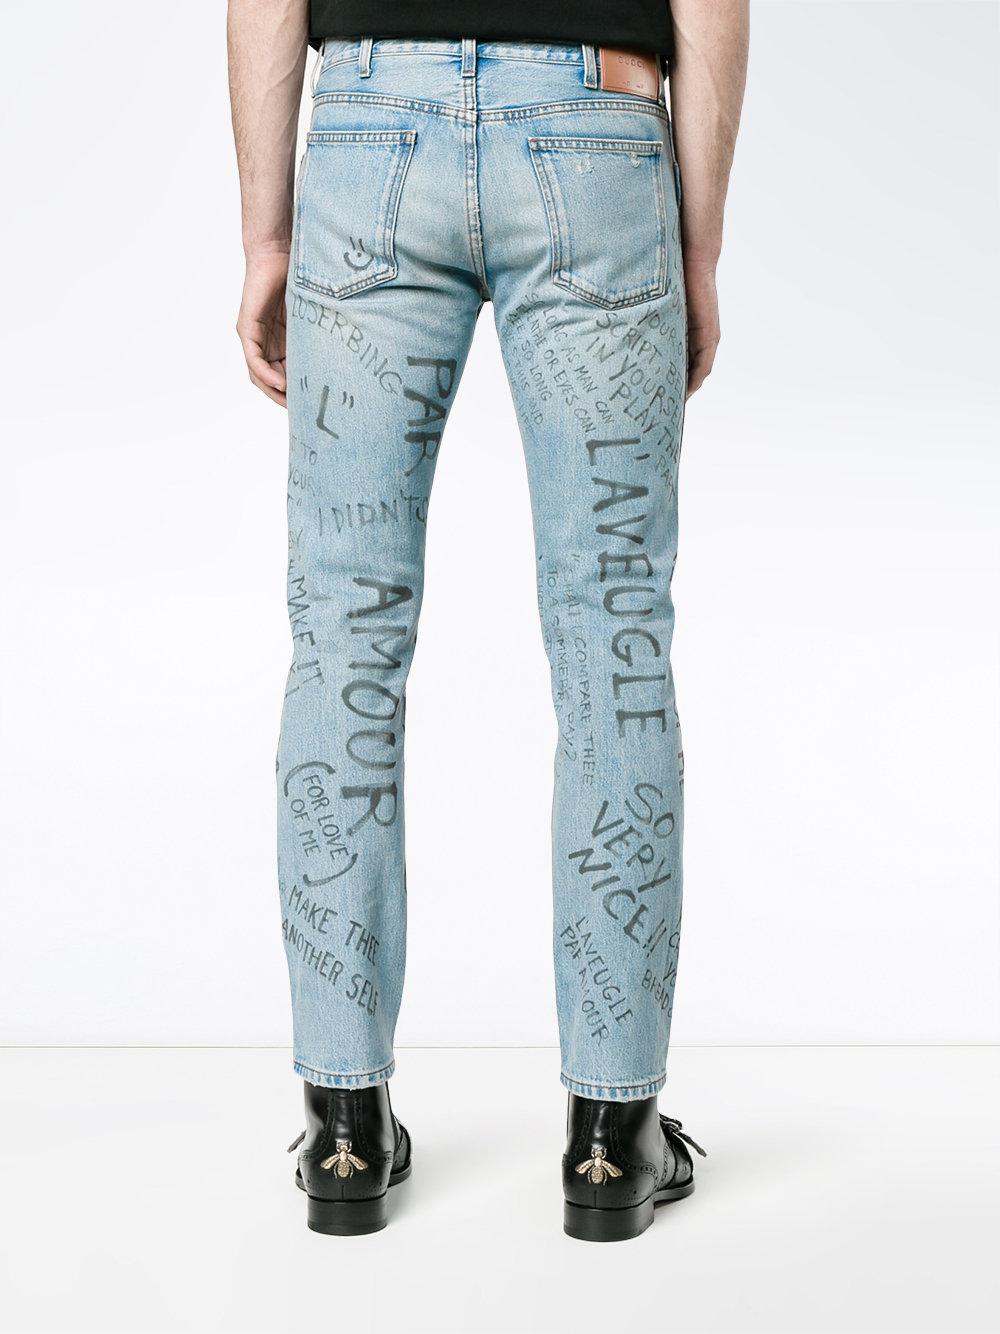 gucci printed jeans